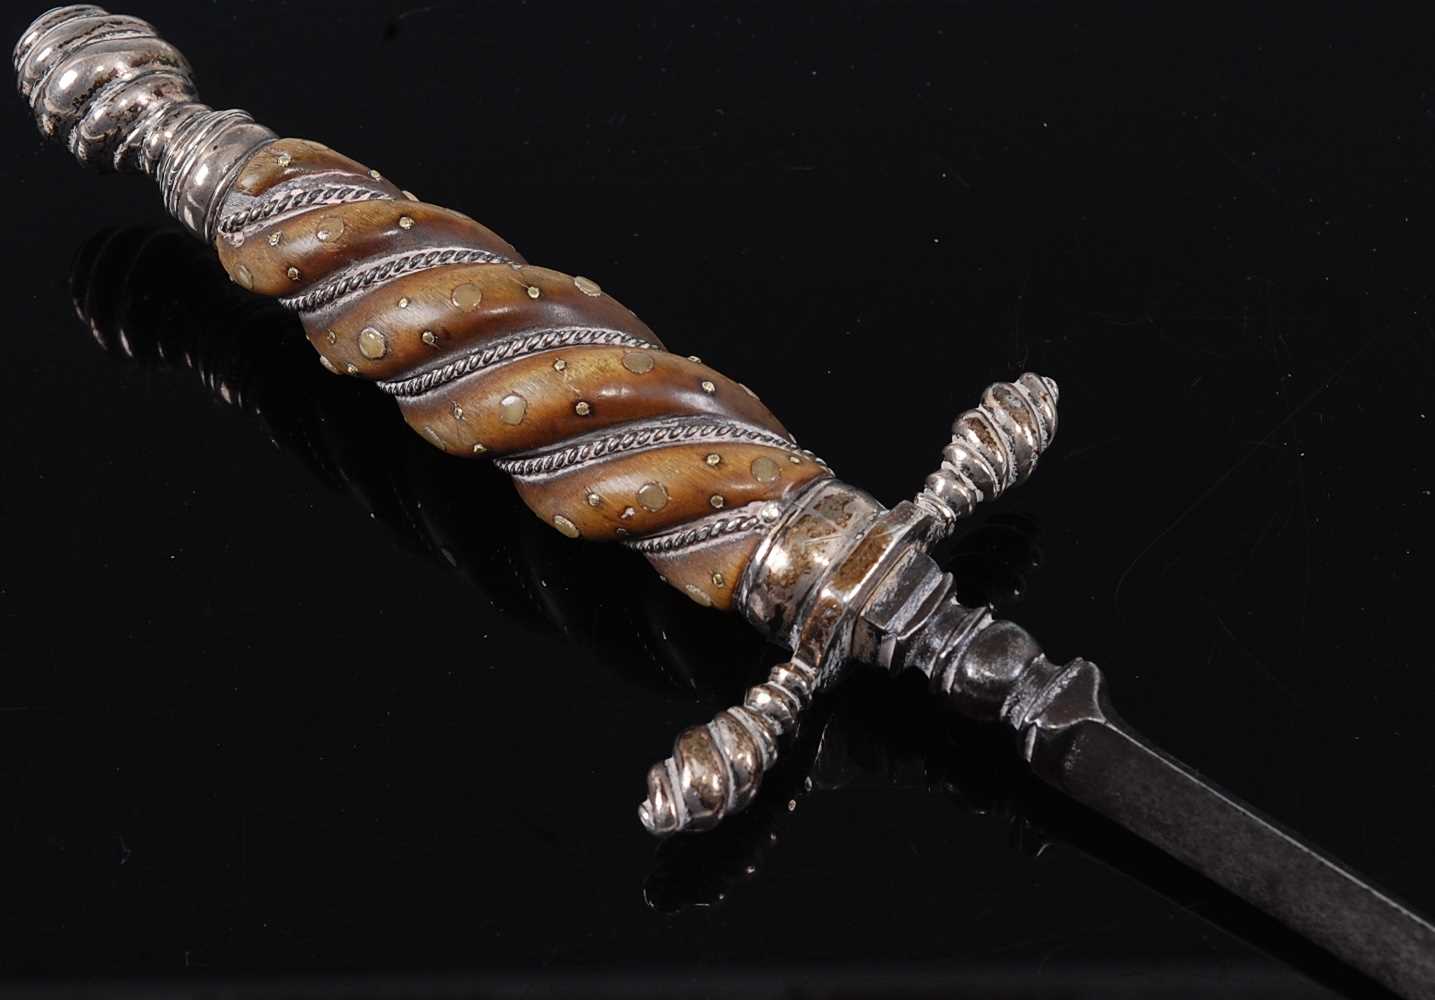 Sold at Auction: Italian knife